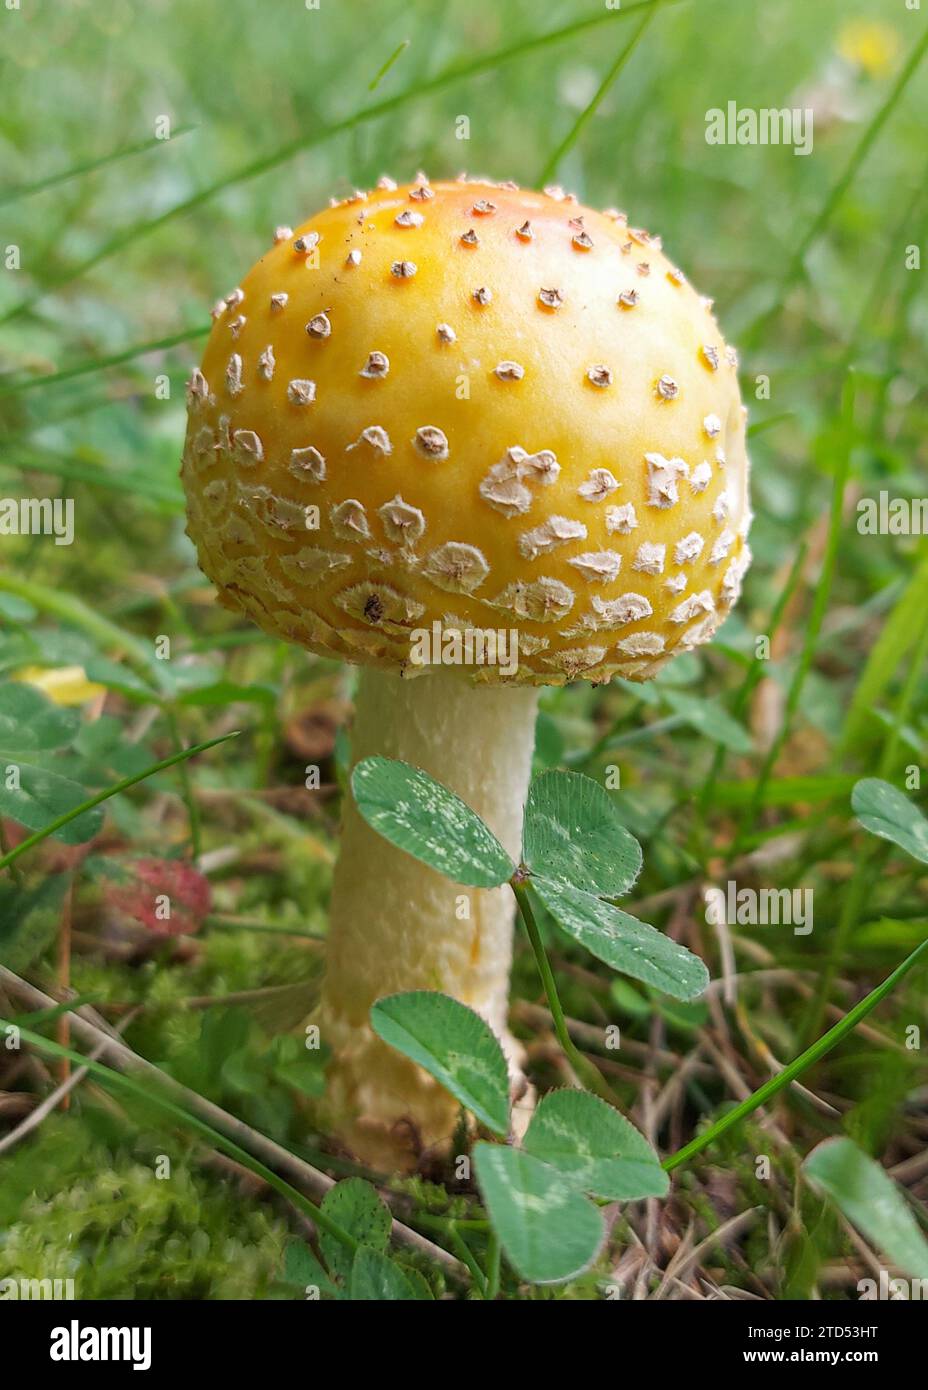 Closeup of rounded cap yellow Fly Agaric mushroom growing in grass field Stock Photo